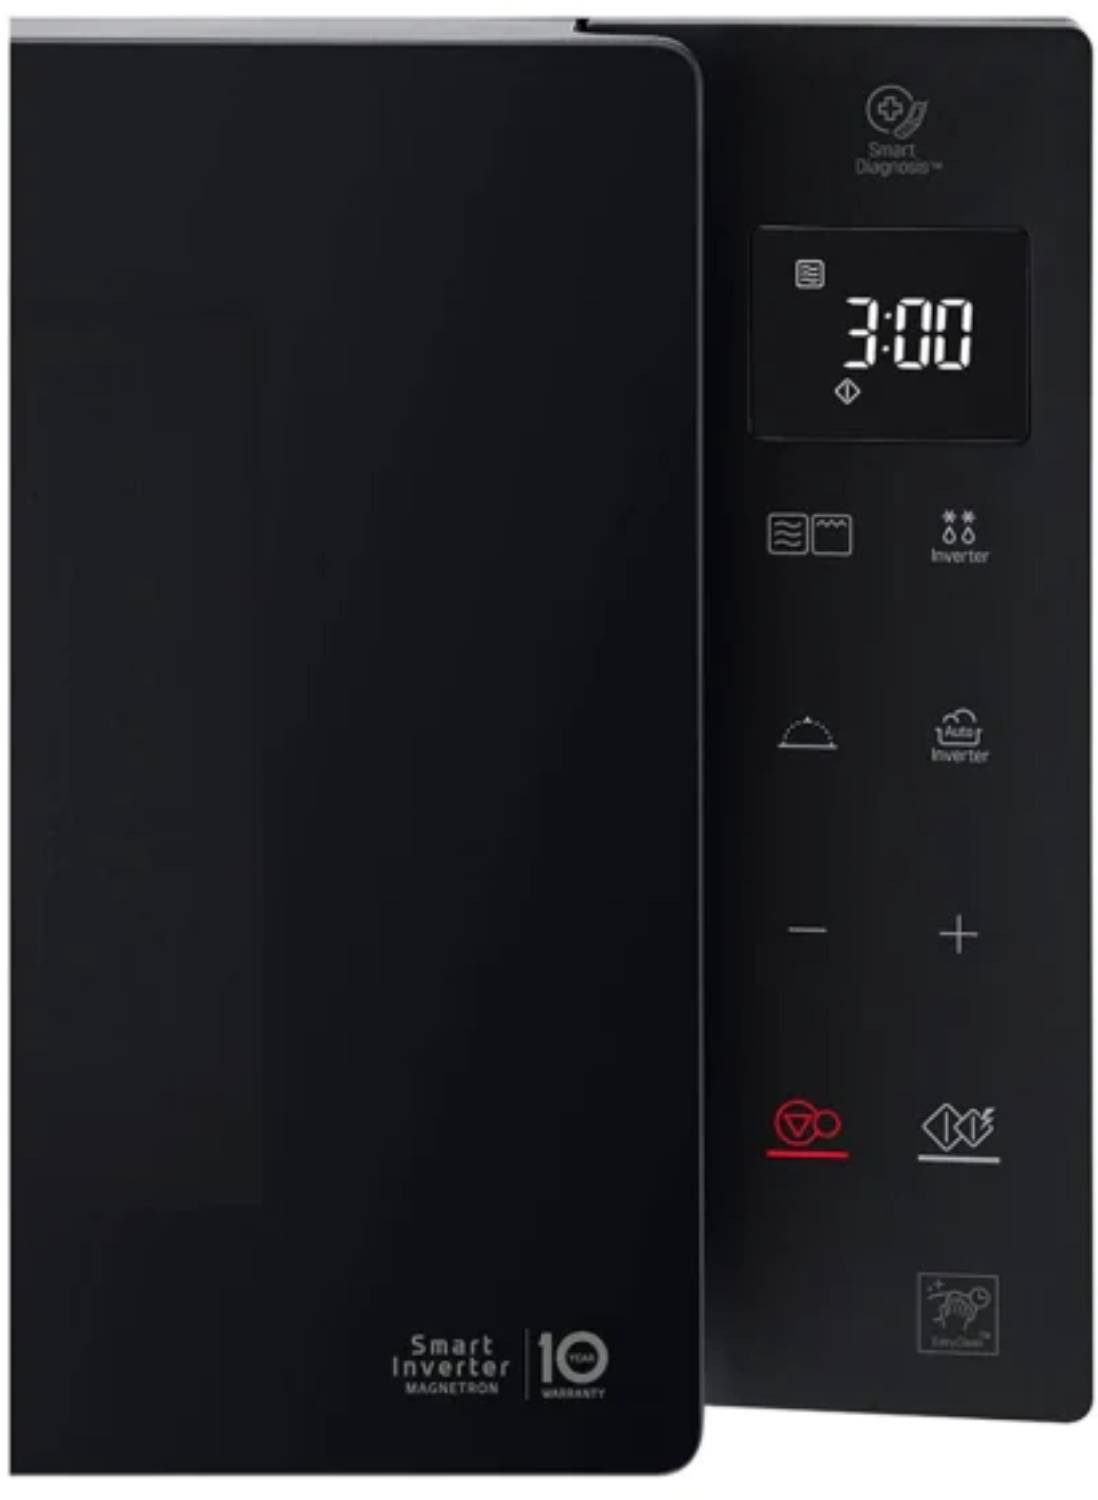 LG Micro ondes Grill 1000W 25L Noir - MH6535GDS